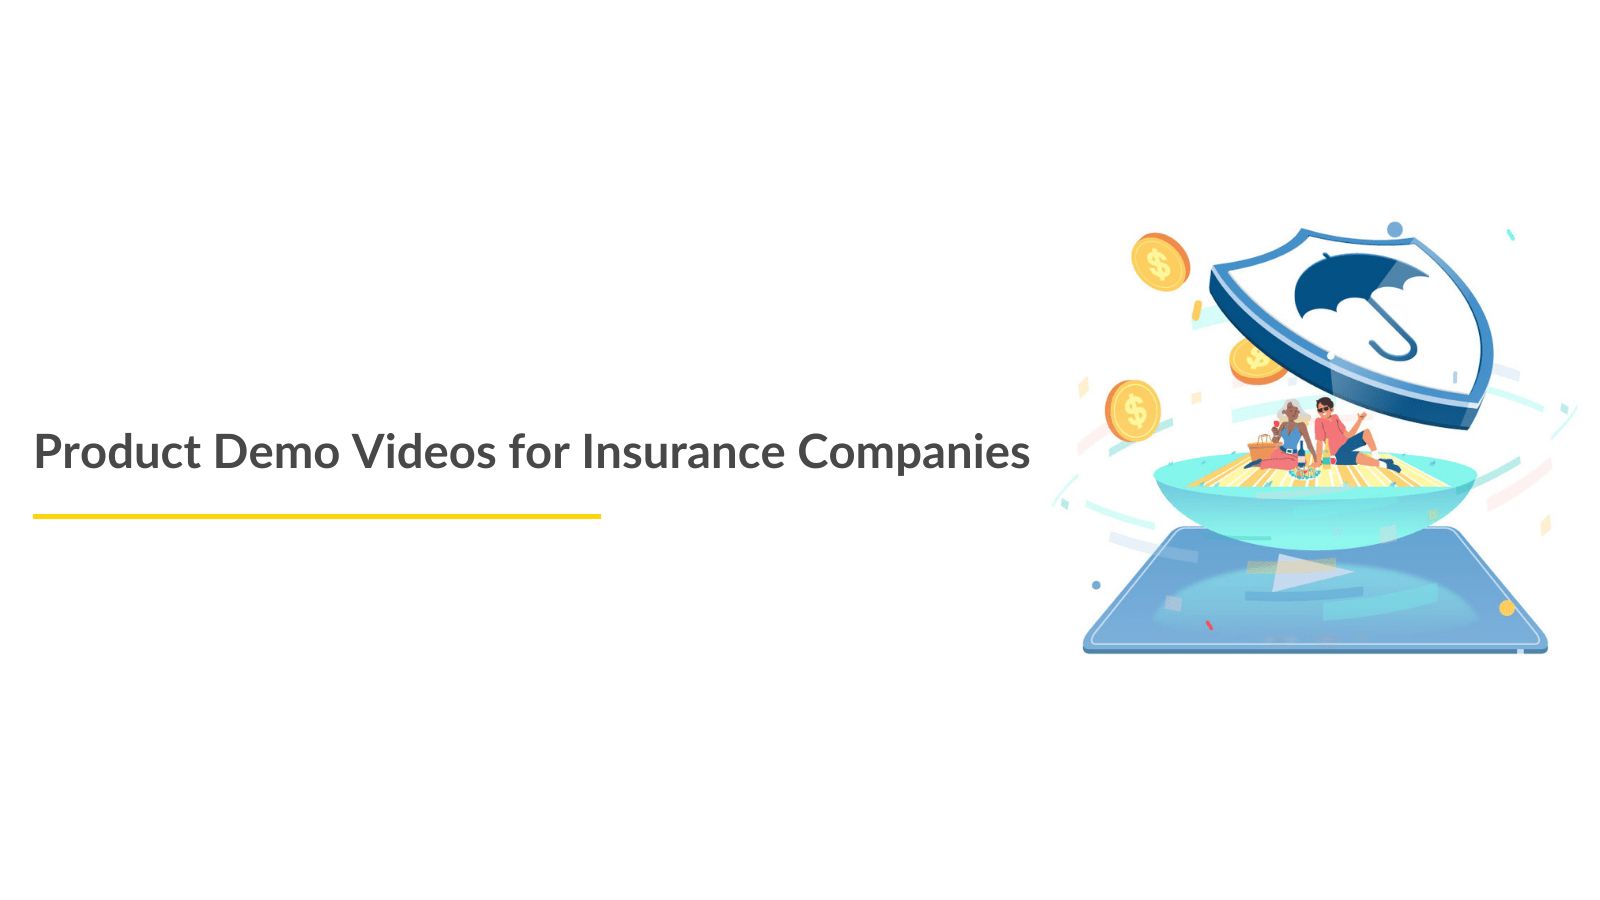 Product Demo Videos for Insurance Companies